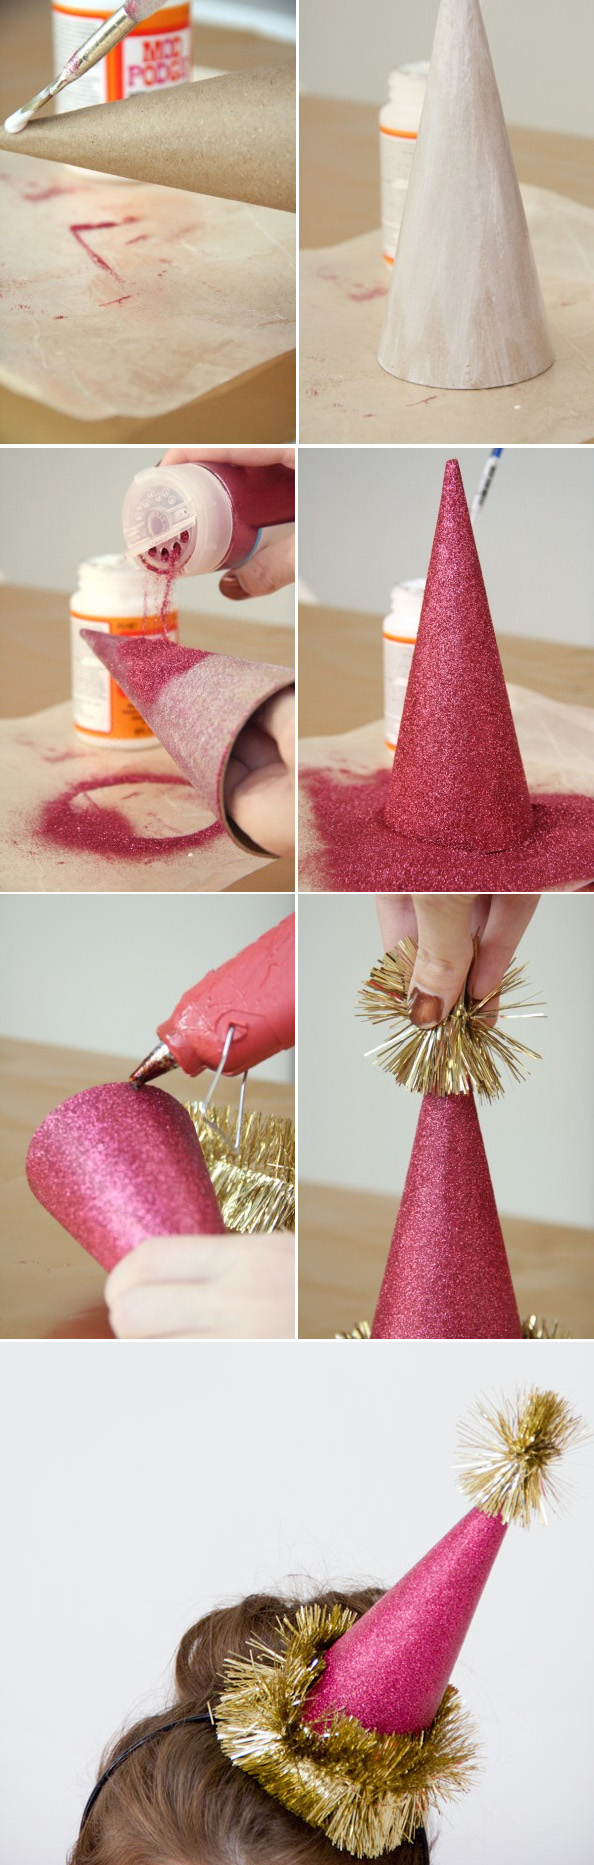 make-your-own-party-hats